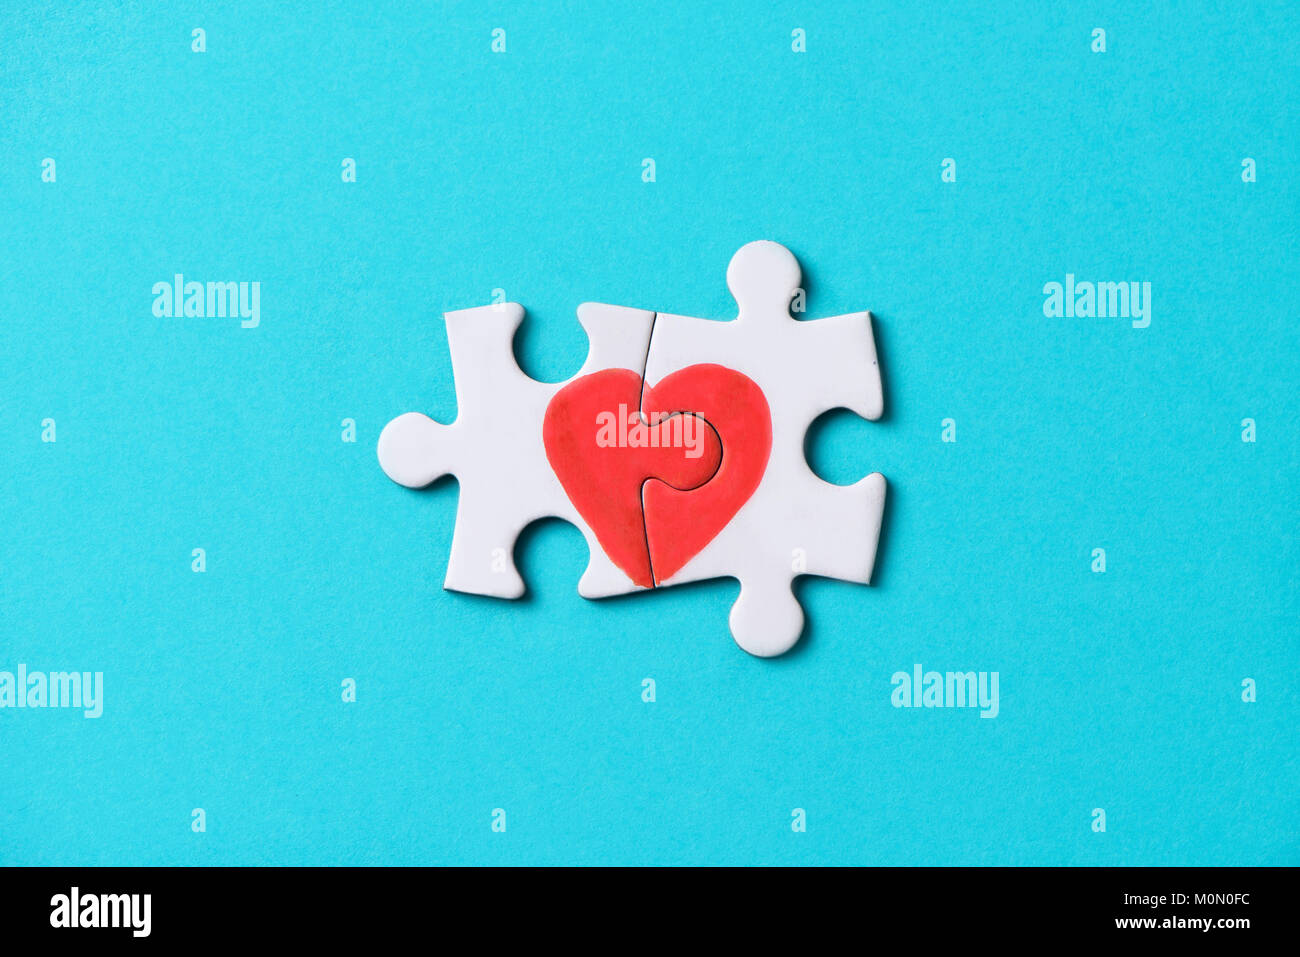 closeup of two pieces of a puzzle forming a heart, depicting the idea that love is a matter of two, on a blue background, with some blank space around Stock Photo